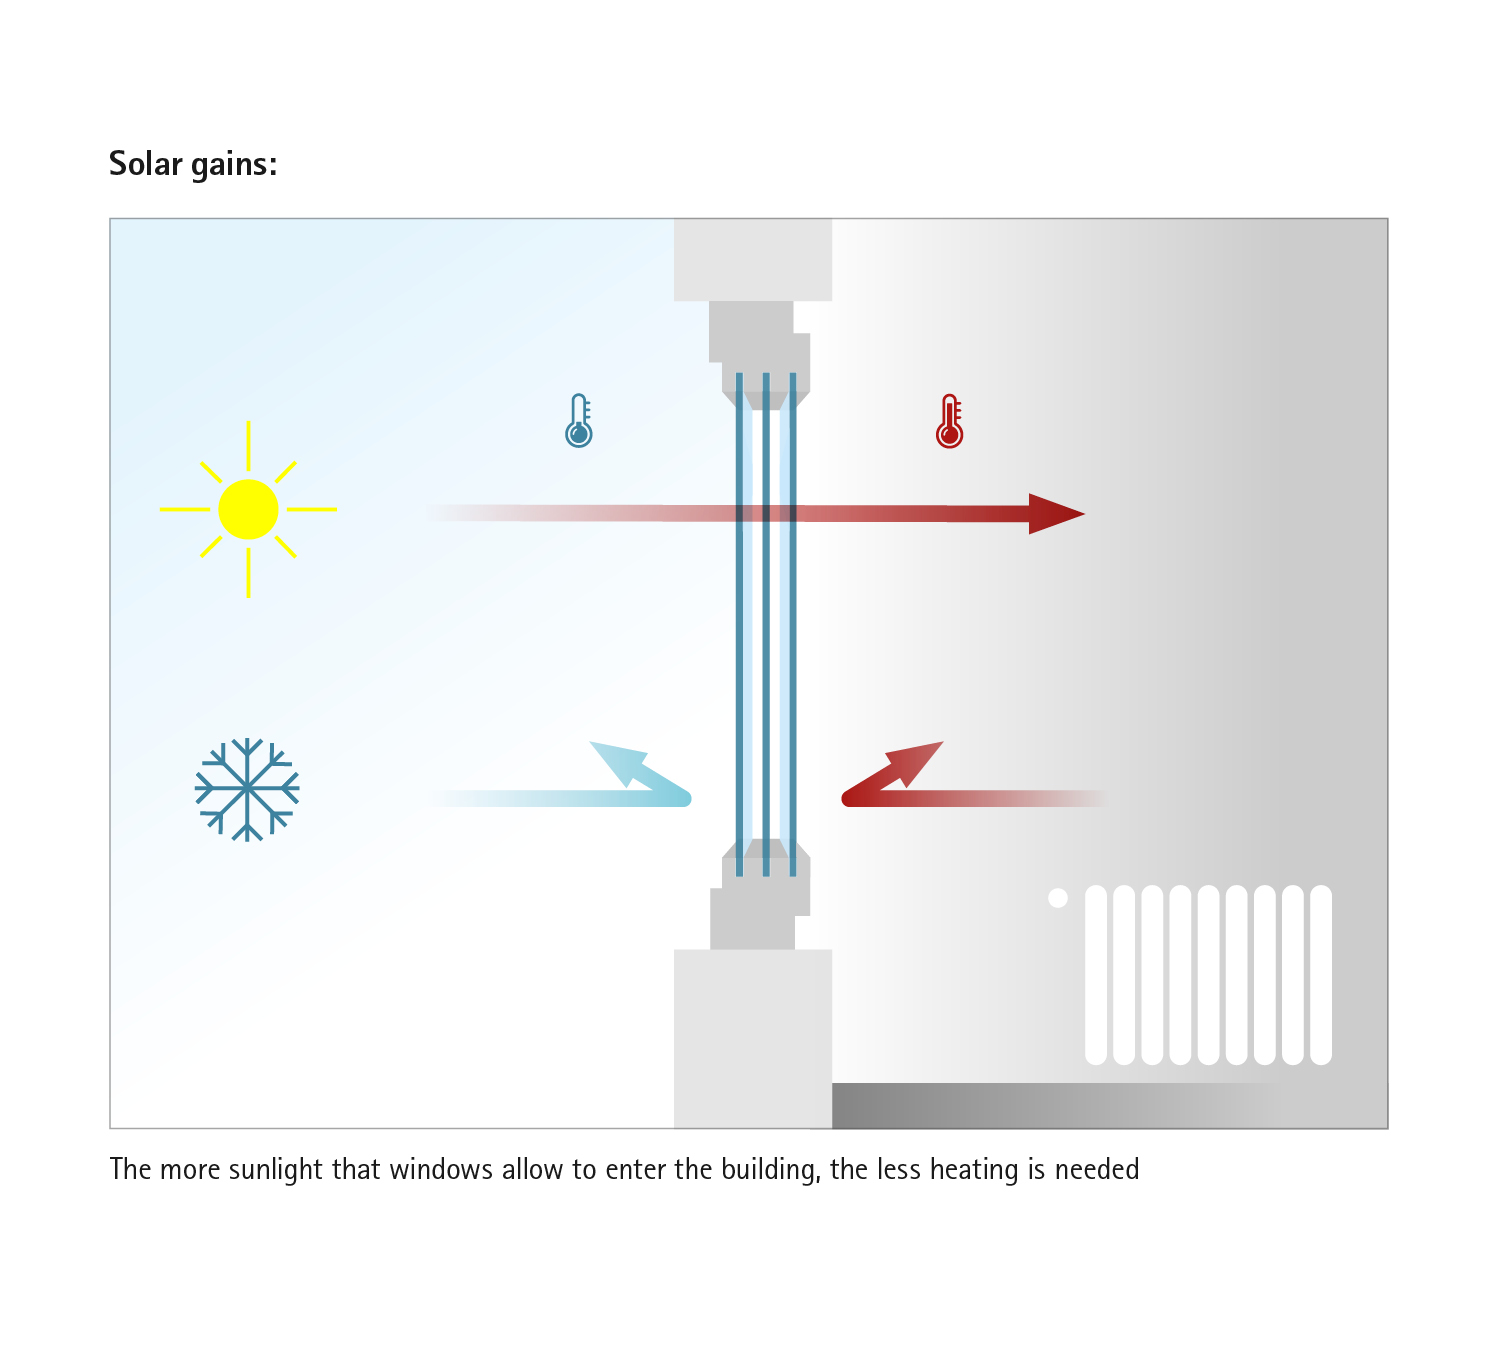 Solar energy gains: High-performance window elements let solar radiation into the house and reduce the loss of thermal energy